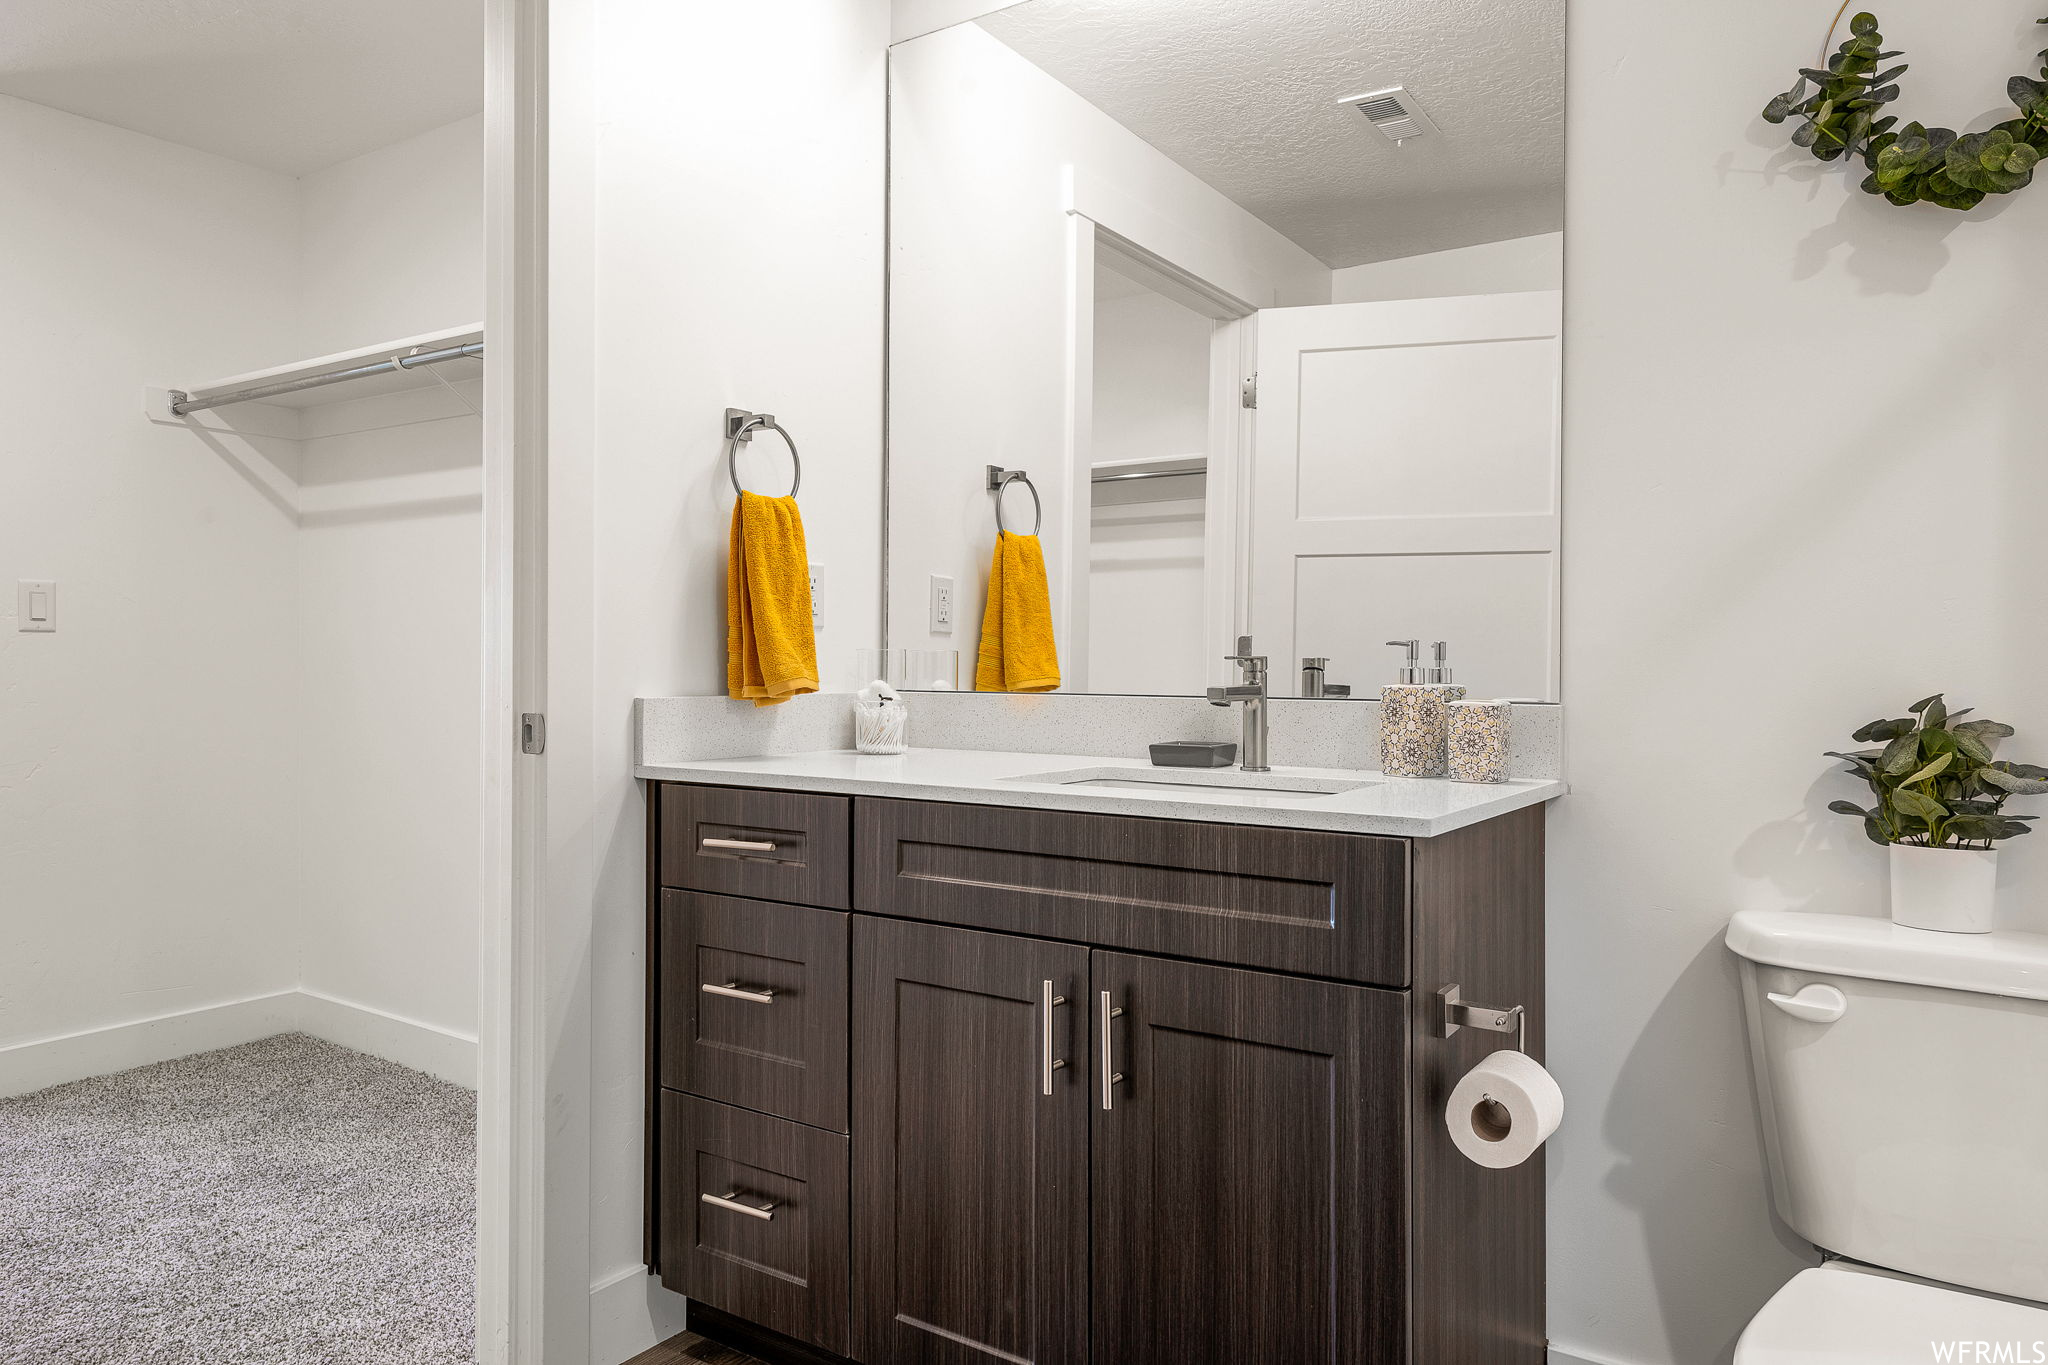 Bathroom featuring vanity with extensive cabinet space, mirror, and a textured ceiling